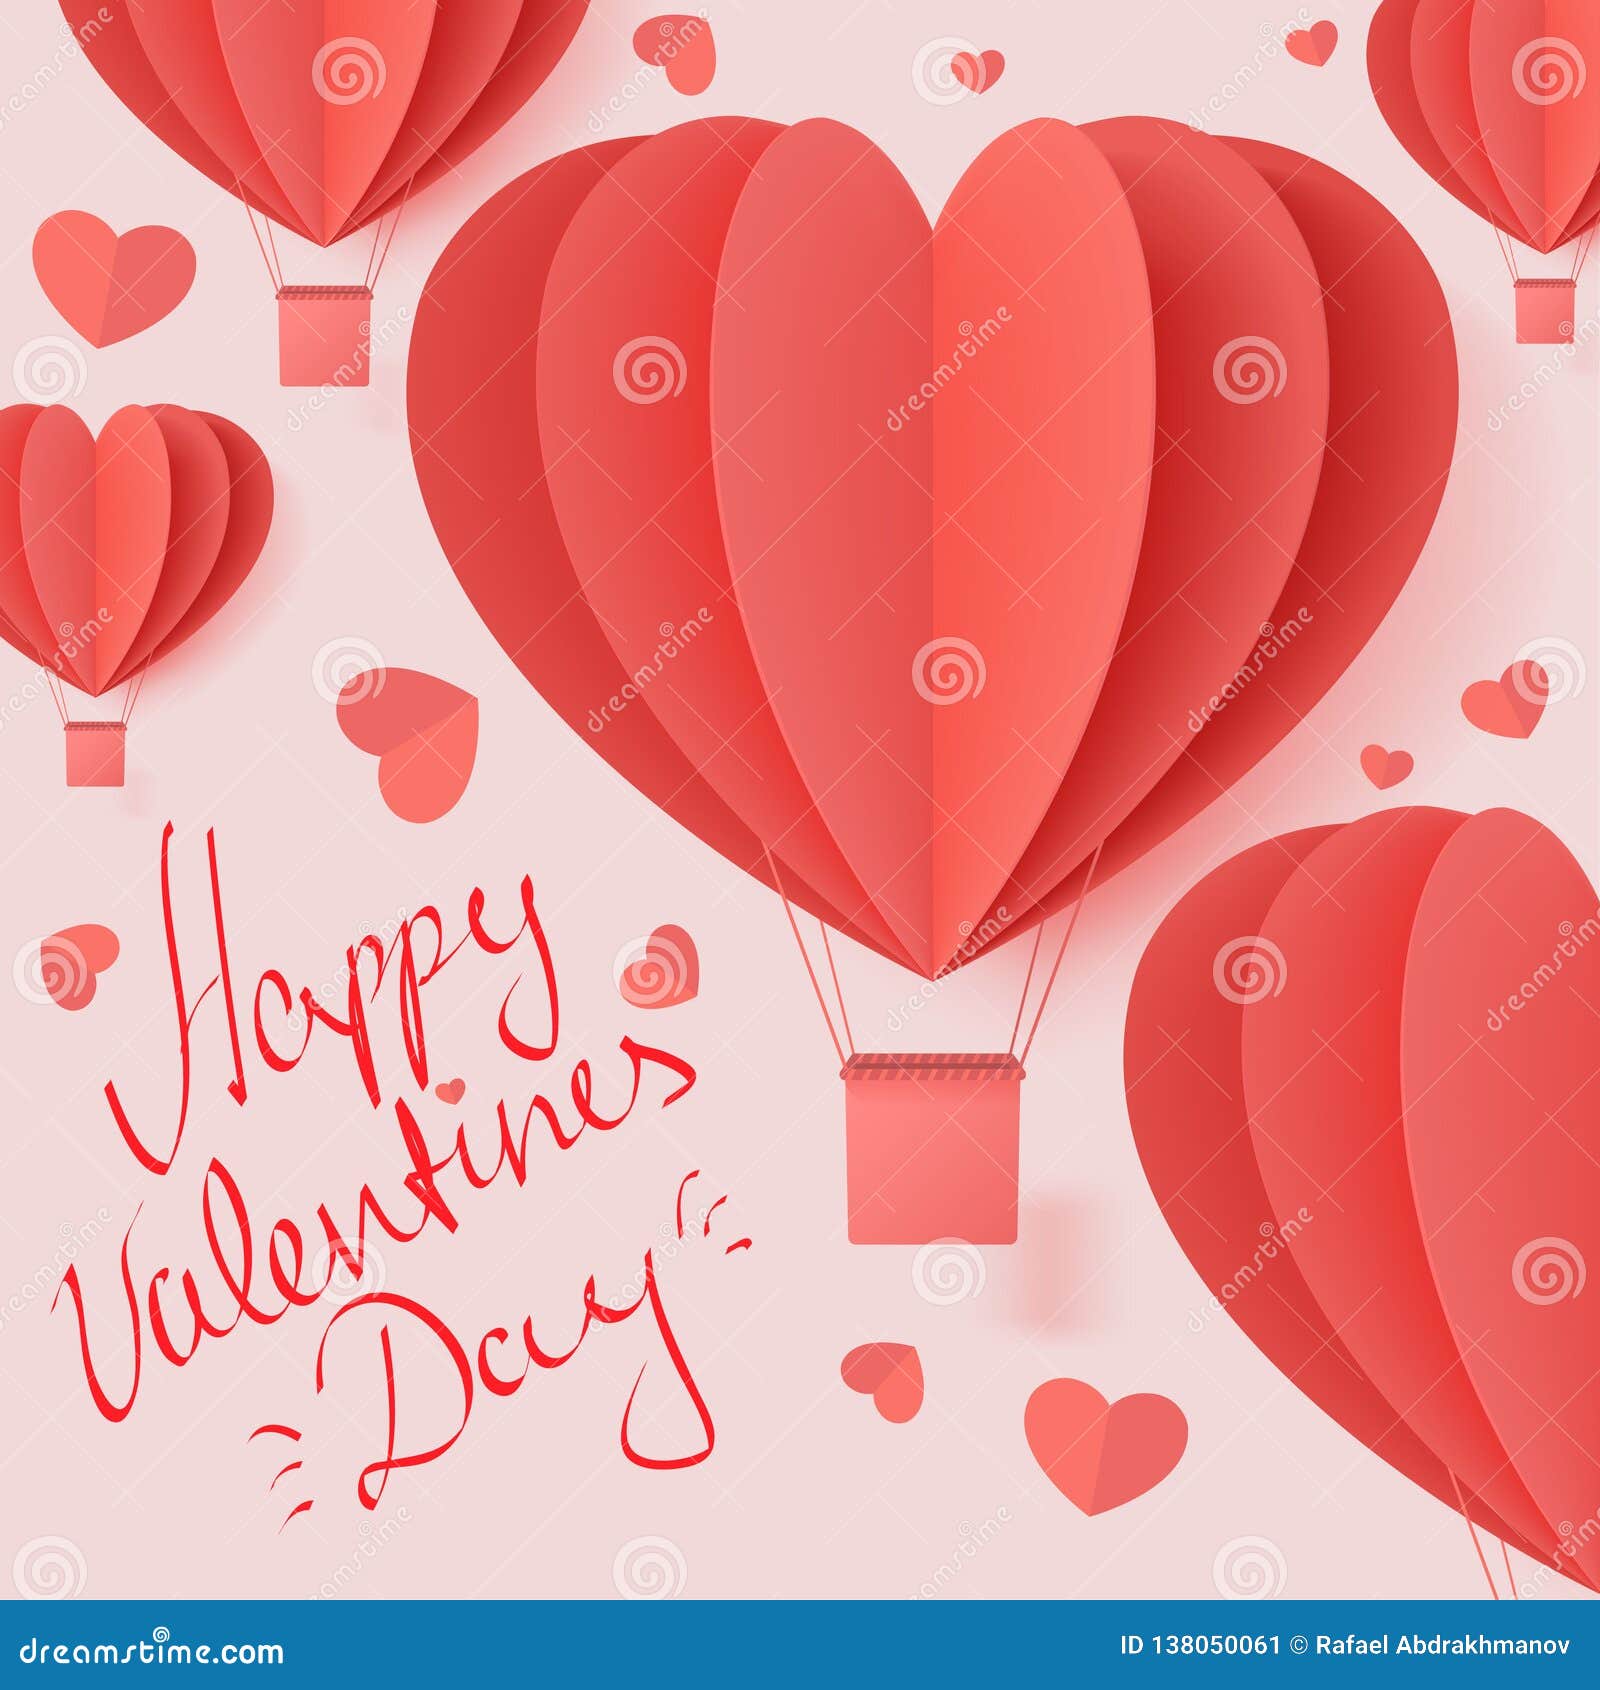 Happy Valentines Day Typography Vector Illustration Design With Paper Cut Red Heart Shape Origami Made Hot Air Balloons Flying In Stock Vector Illustration Of Design Celebration